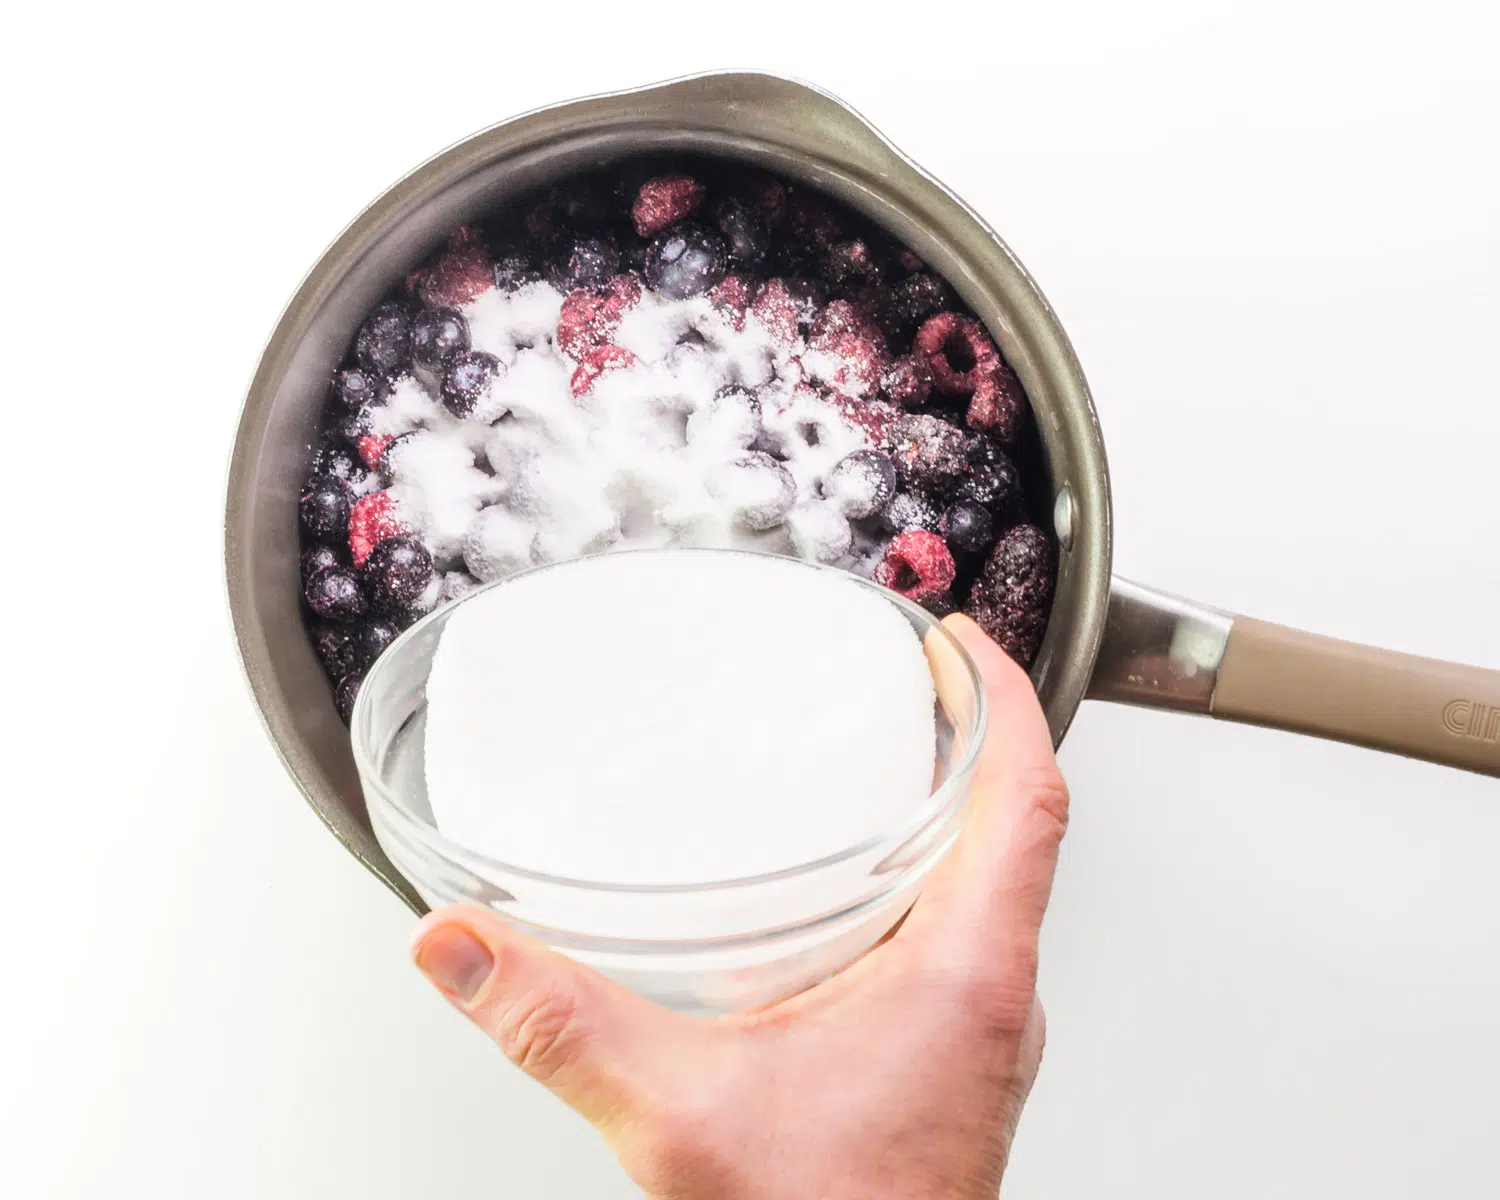 Sugar is being poured into a saucepan with mixed berries.